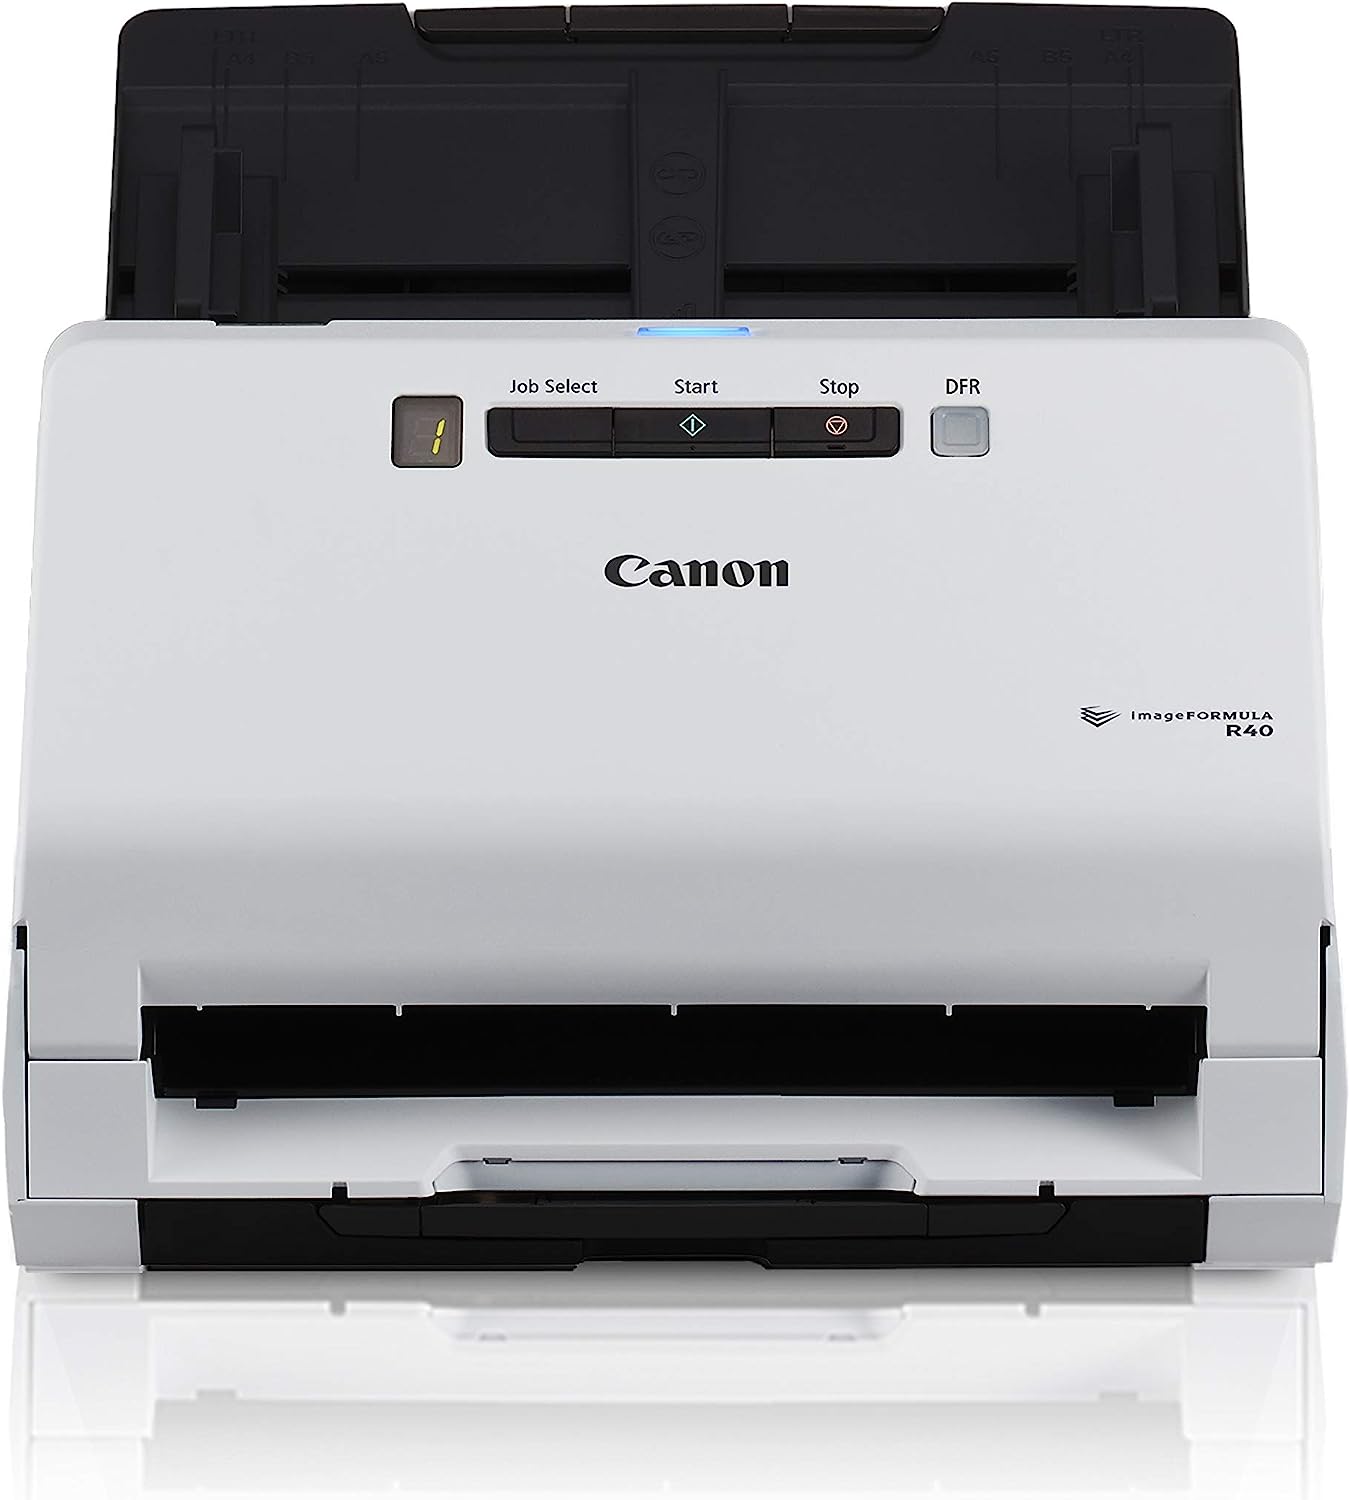 Canon imageFORMULA R40 Office Document Scanner For PC [...]